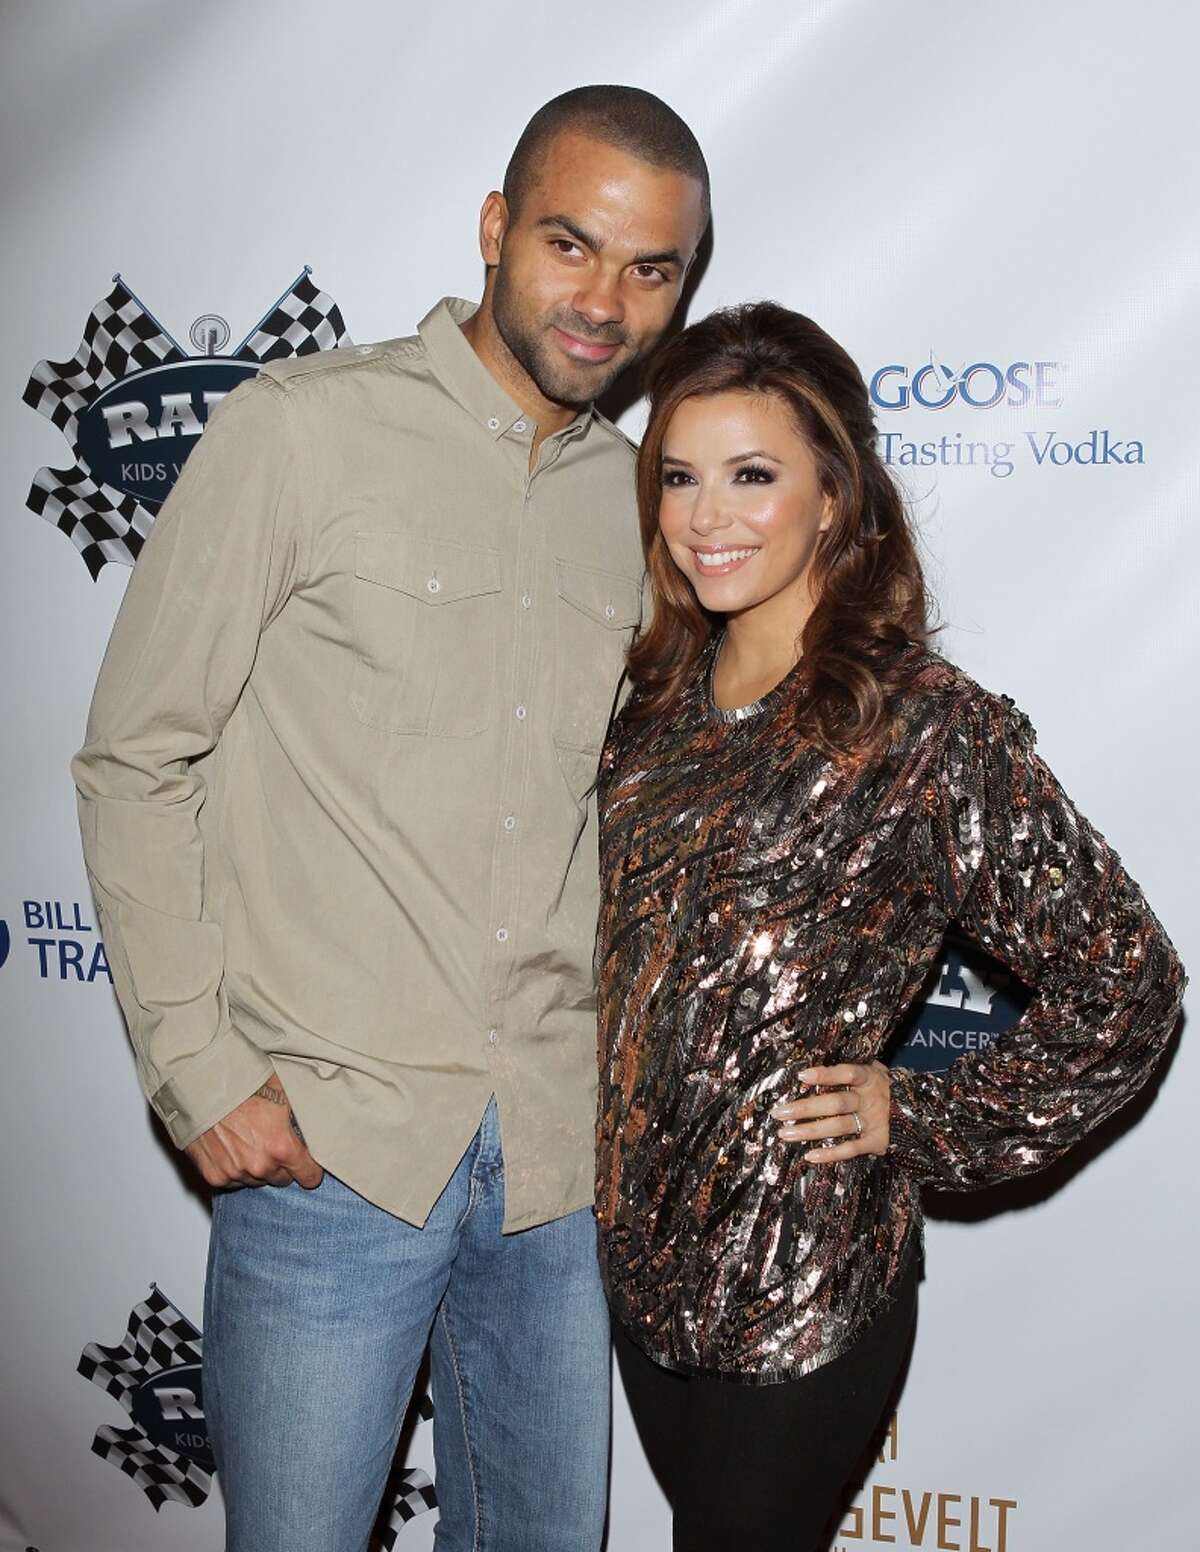 Tony Parker and Eva Longoria were married from 2007-2010. Their marriage was rocked from the beginning by rumors of Parker's infidelity, confirmed in 2010 by Erin Berry, wife of Parker's former teammate Brent Barry, who admitted to a relationship with Parker.